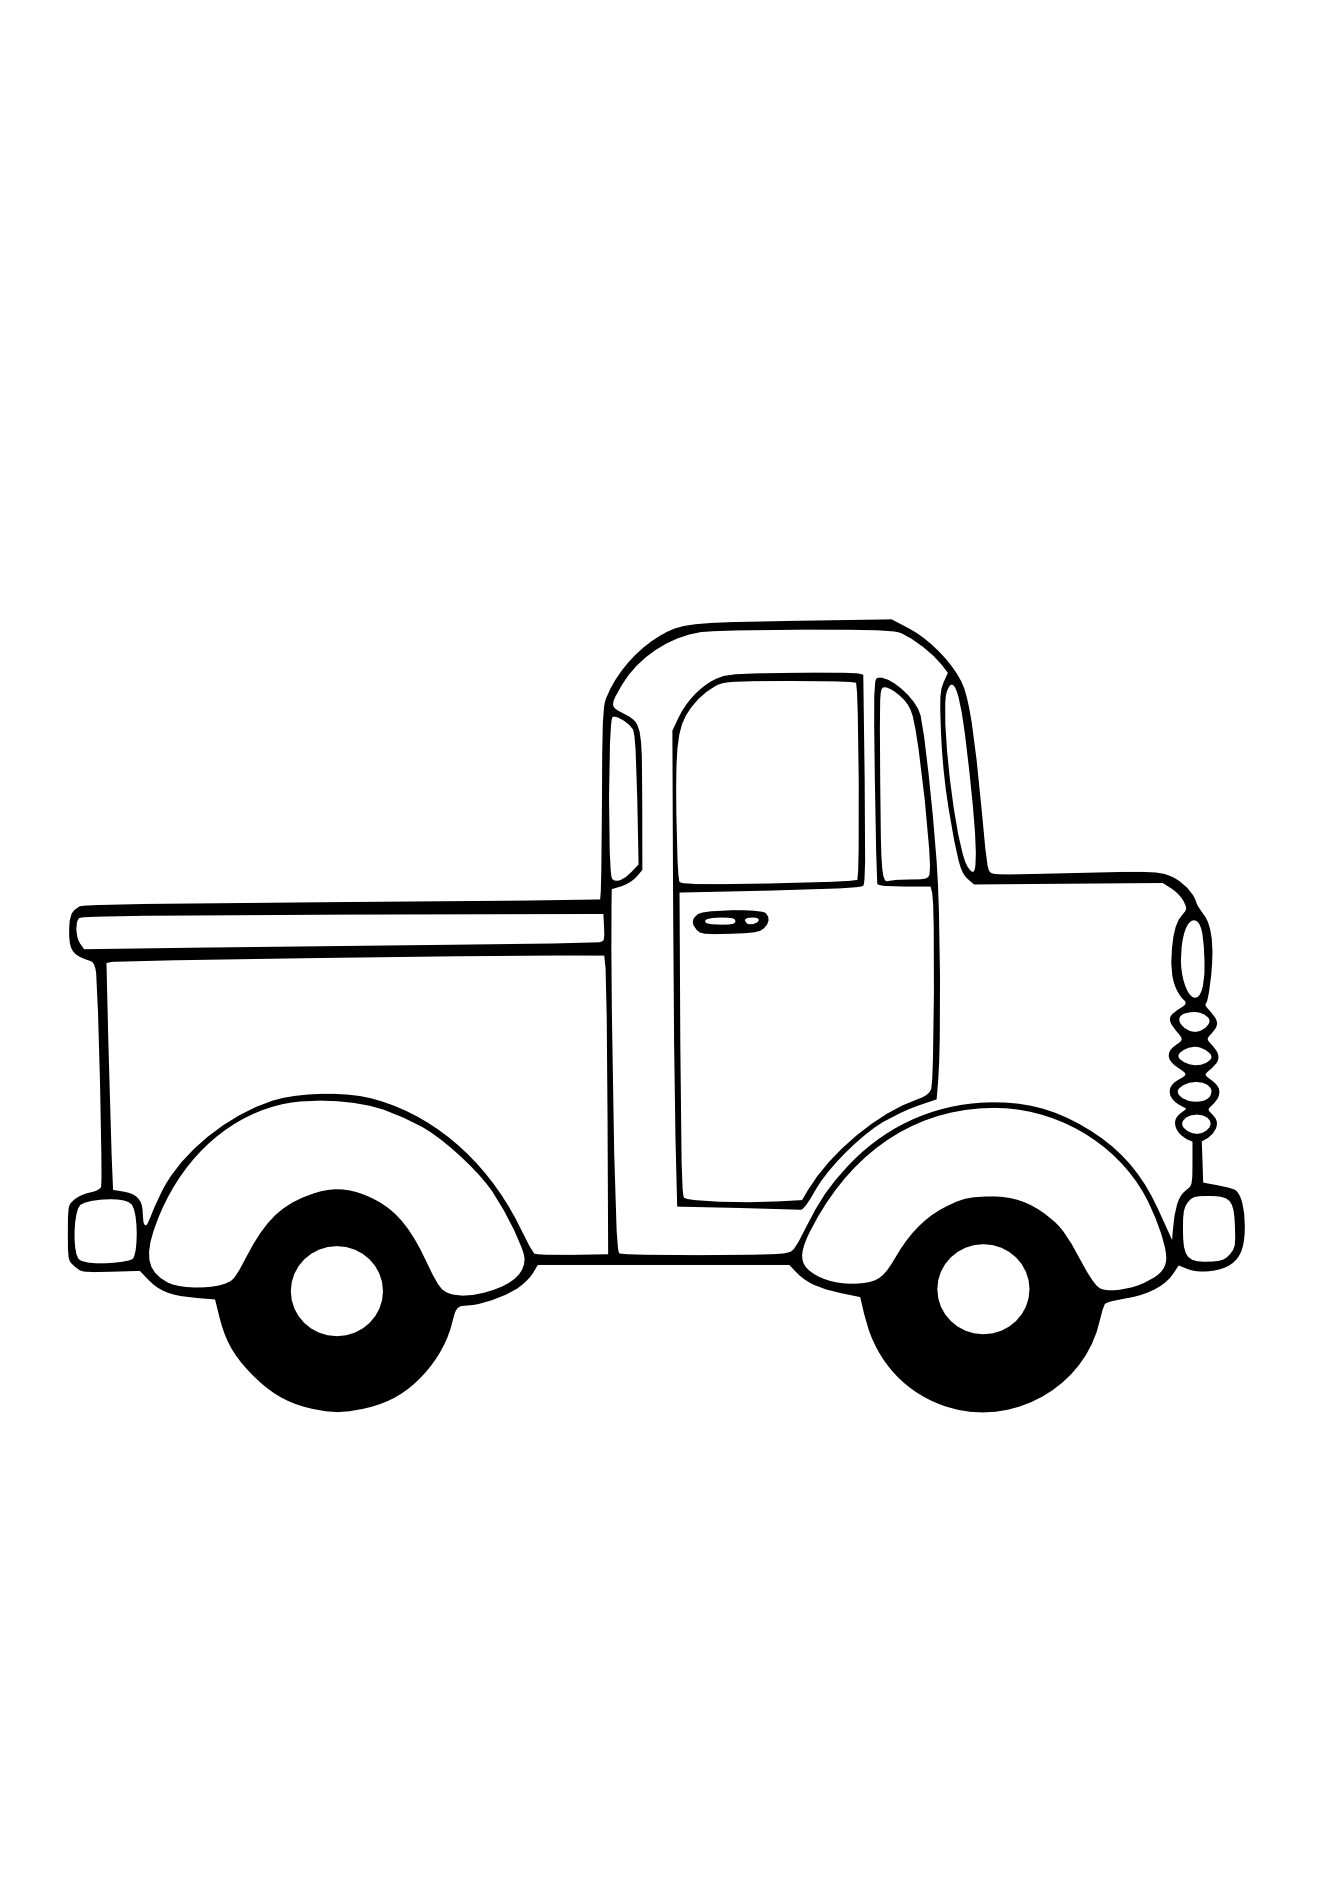 guitar pick clipart black and - Truck Clipart Black And White